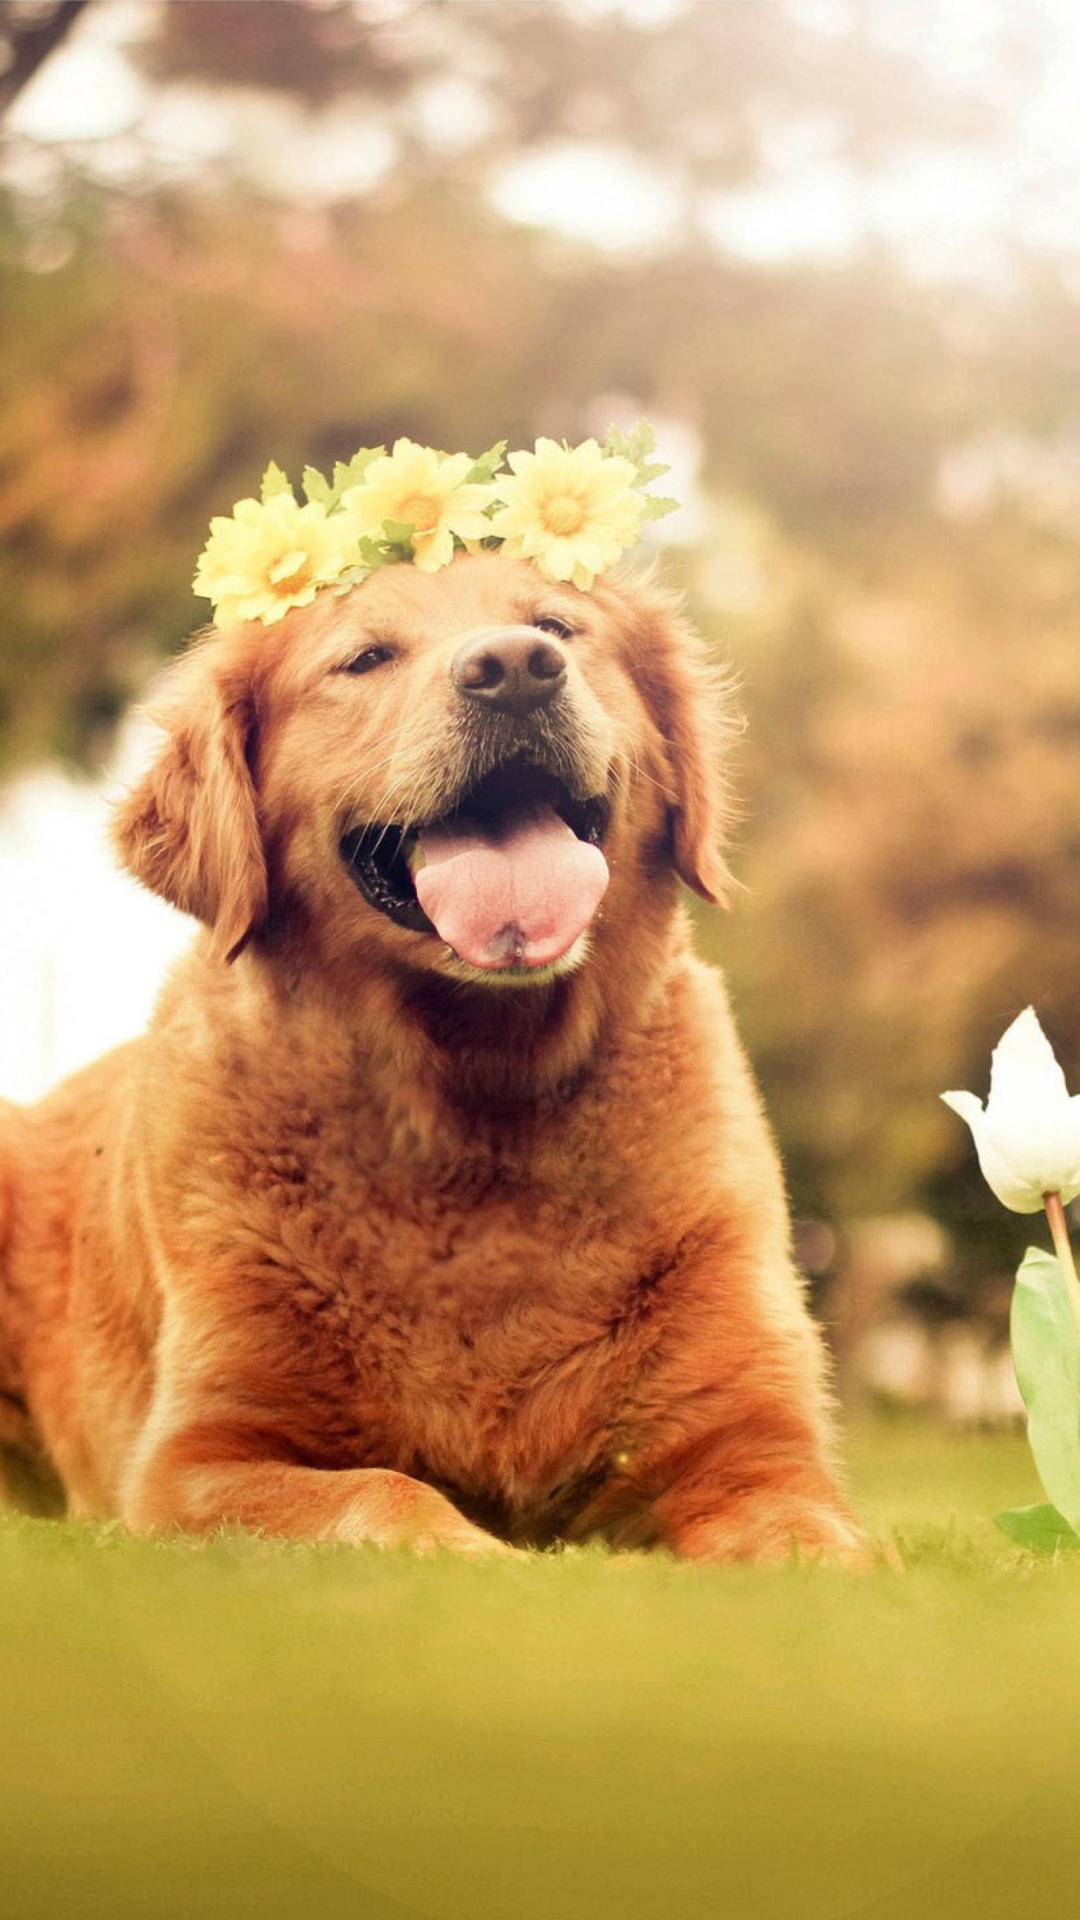 Ginger Dog With Flower Wreath wallpaper 1080x1920